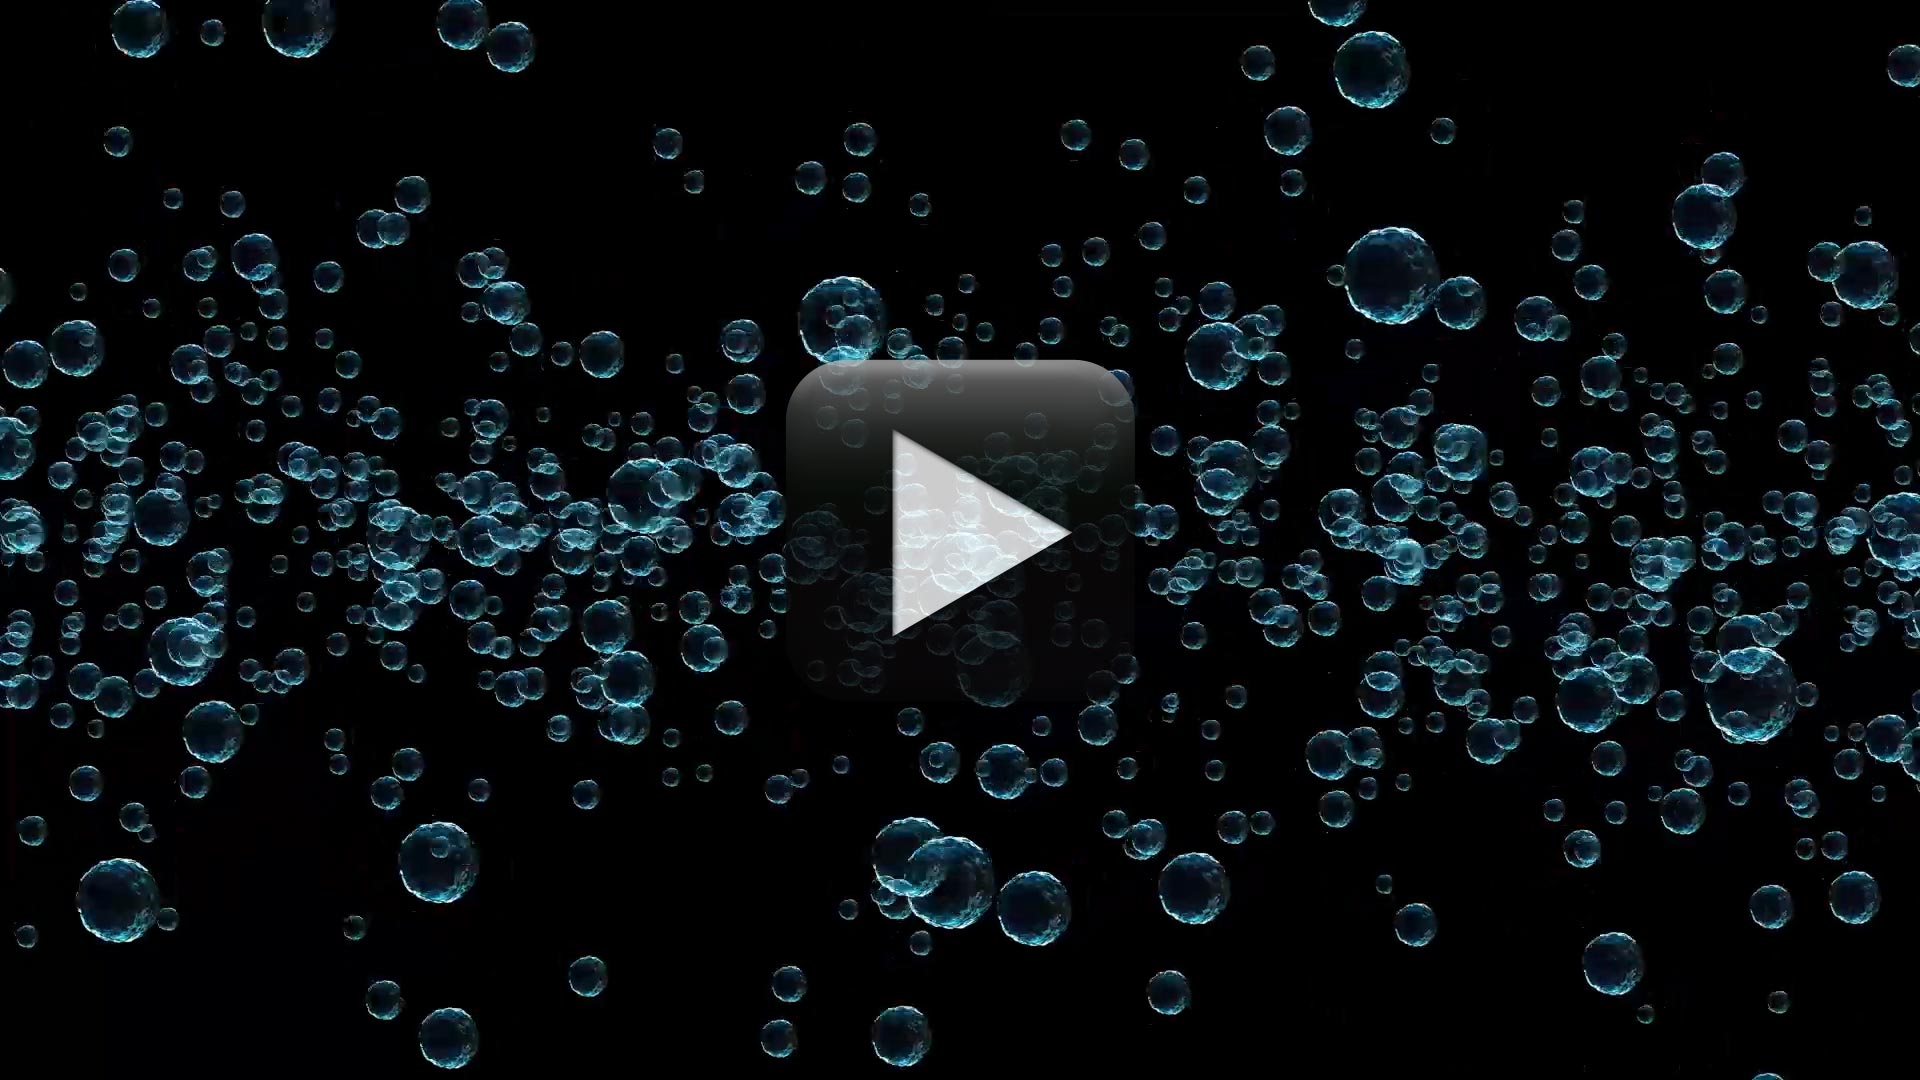 Water Bubbles Video Free Download | All Design Creative